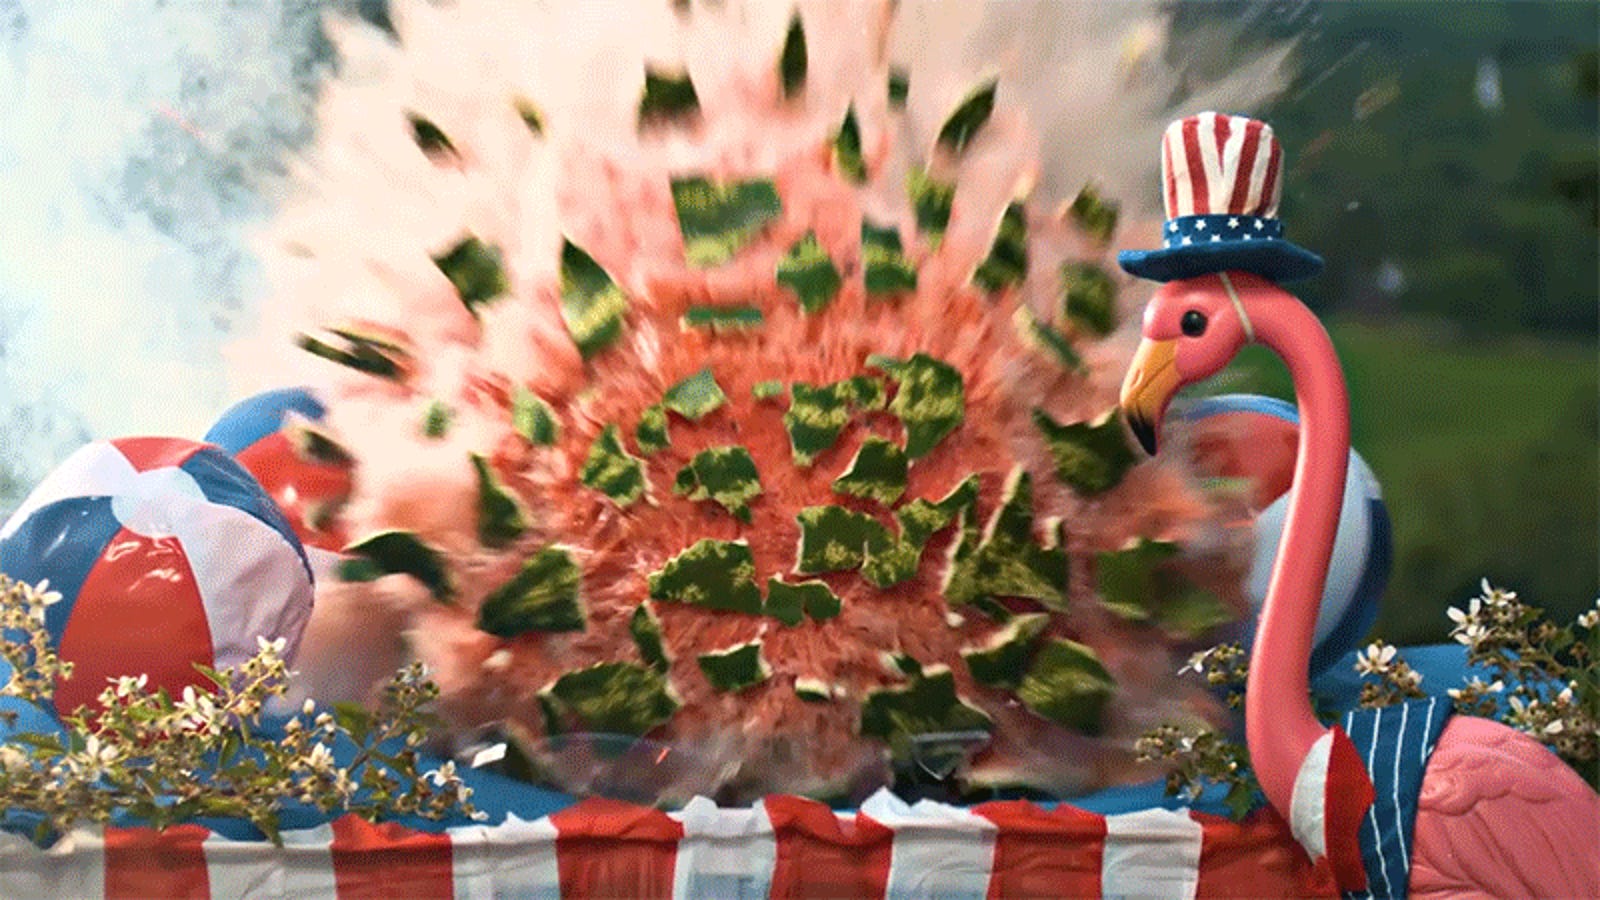 SloMo Footage Of Fireworks Blowing Up A BBQ Is The Best Way To Spend